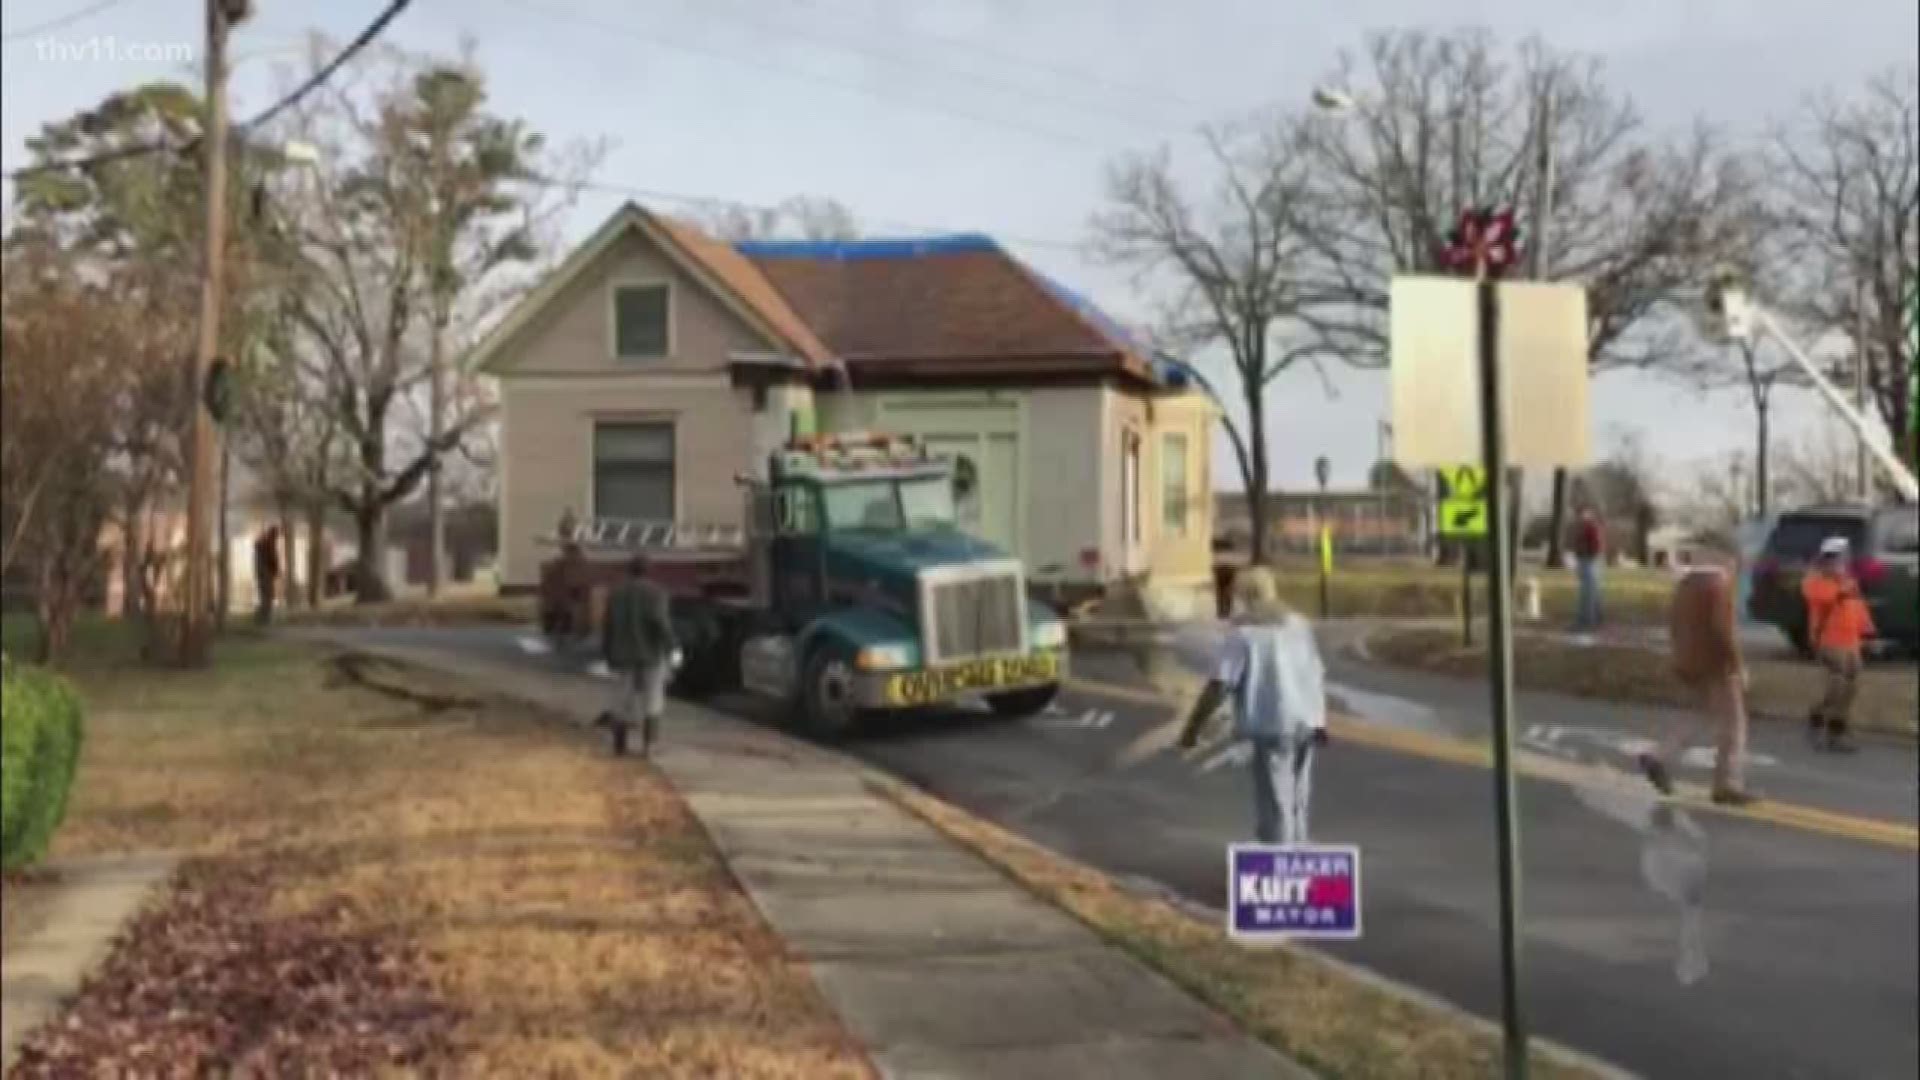 The "Anderson House" in the Hillcrest Neighborhood now sits at a new location after being moved early this morning.